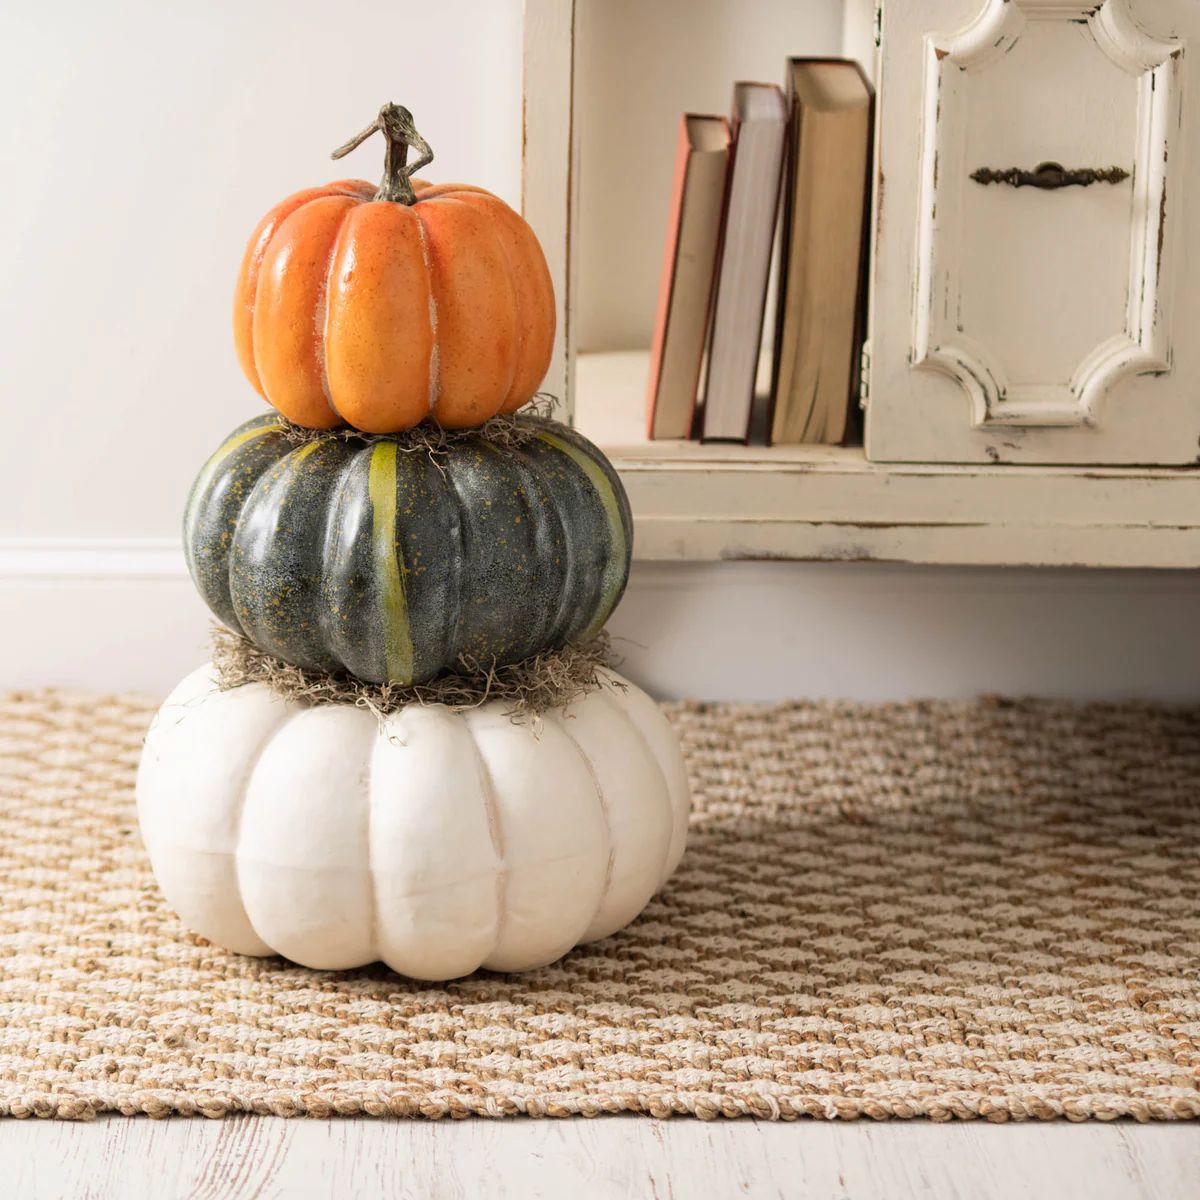 Tri-Color Fall Halloween & Thanksgiving Pumpkin Tower in Orange, Green, & White | Darby Creek Trading